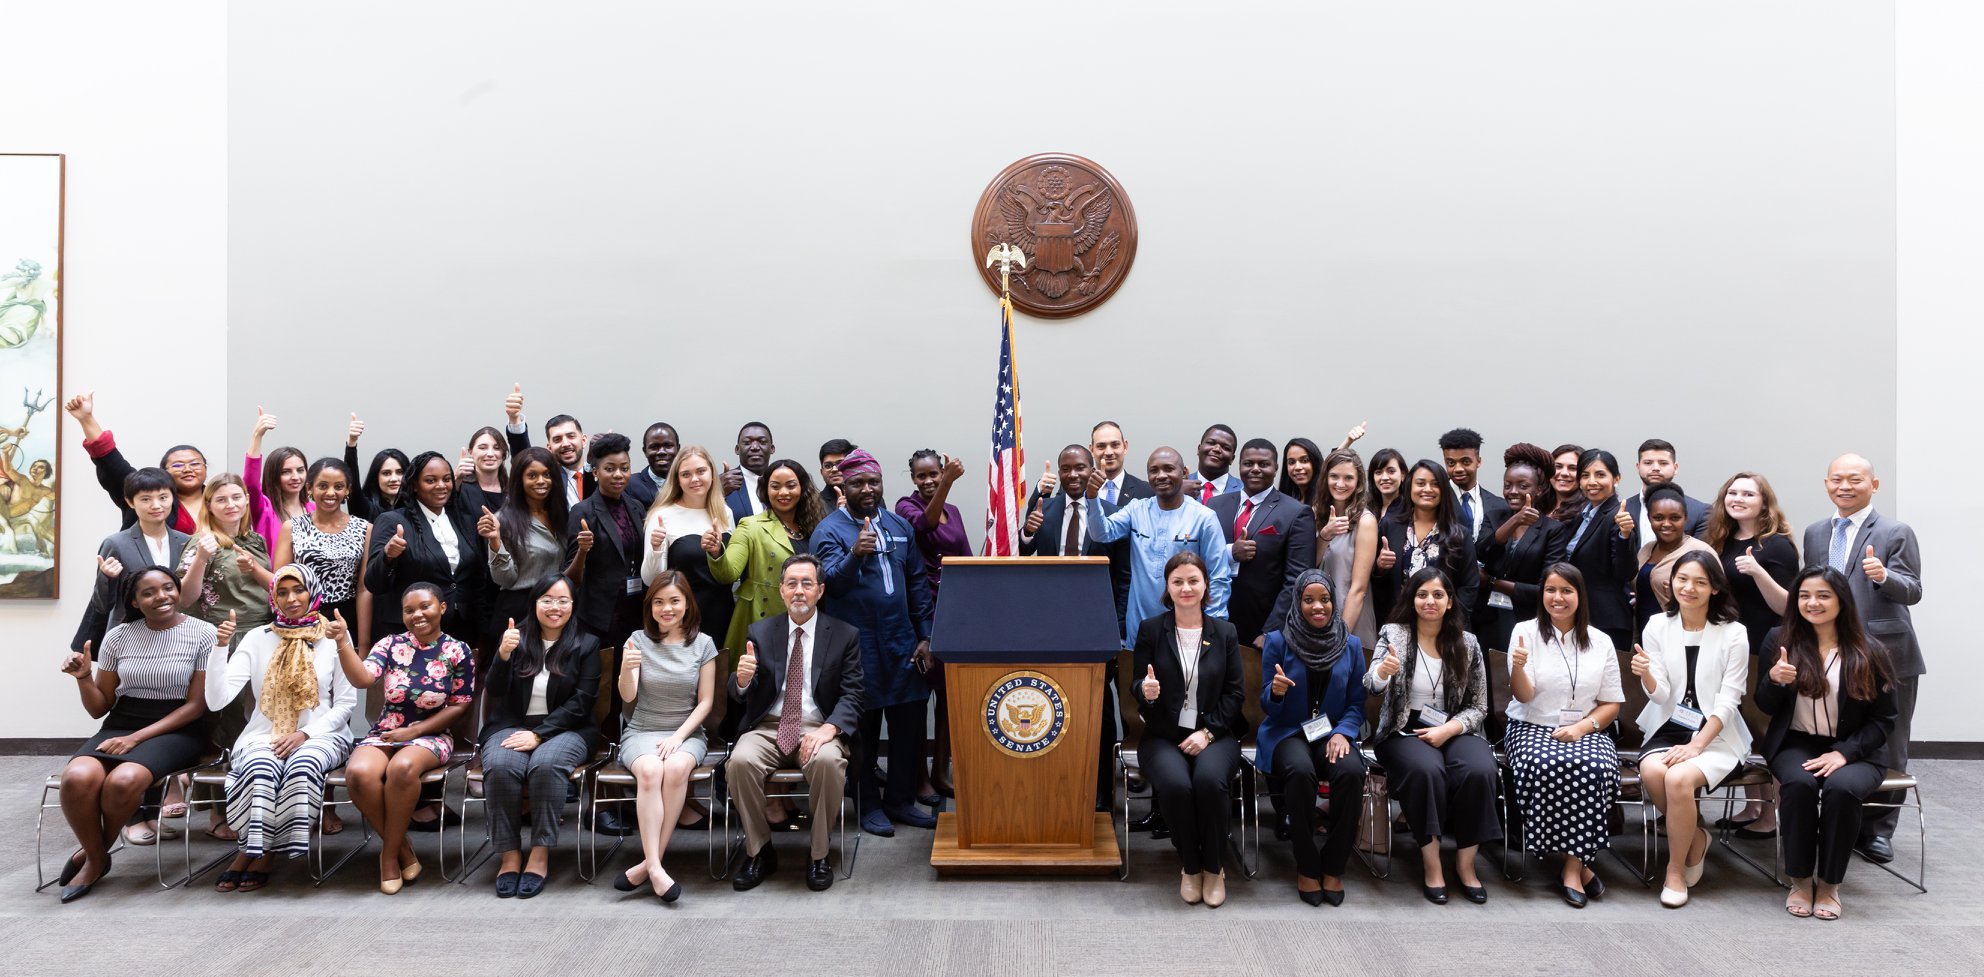 Global Peace Foundation | 2019 International Young Leaders Assembly Kicks off in Washington D.C.